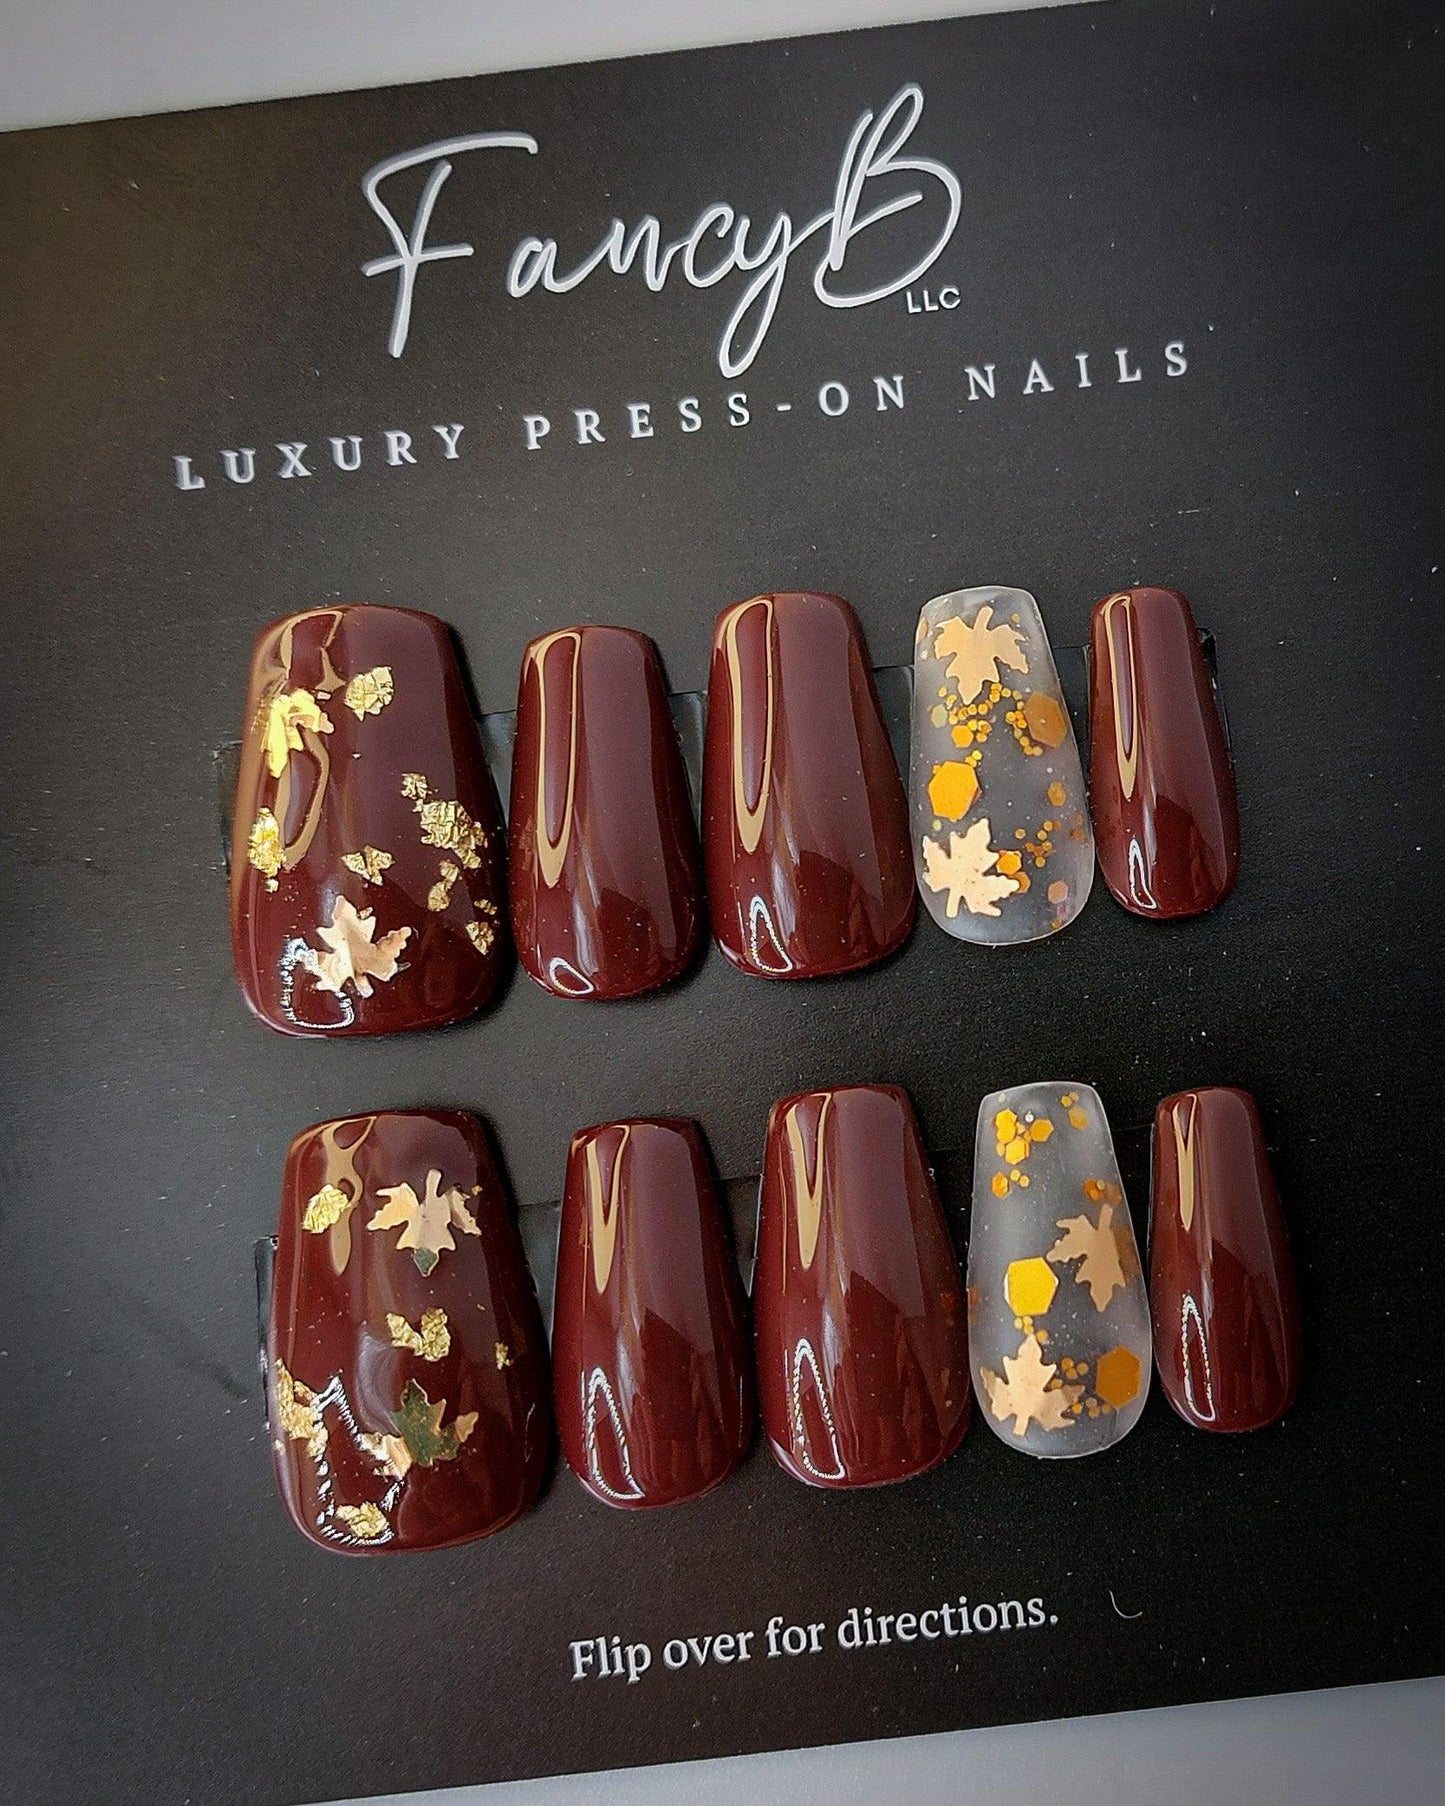 Autumn Aura | The Perfect Fall Press on Nails with Gold Leaf Nail Art - FancyB Press-on Nails